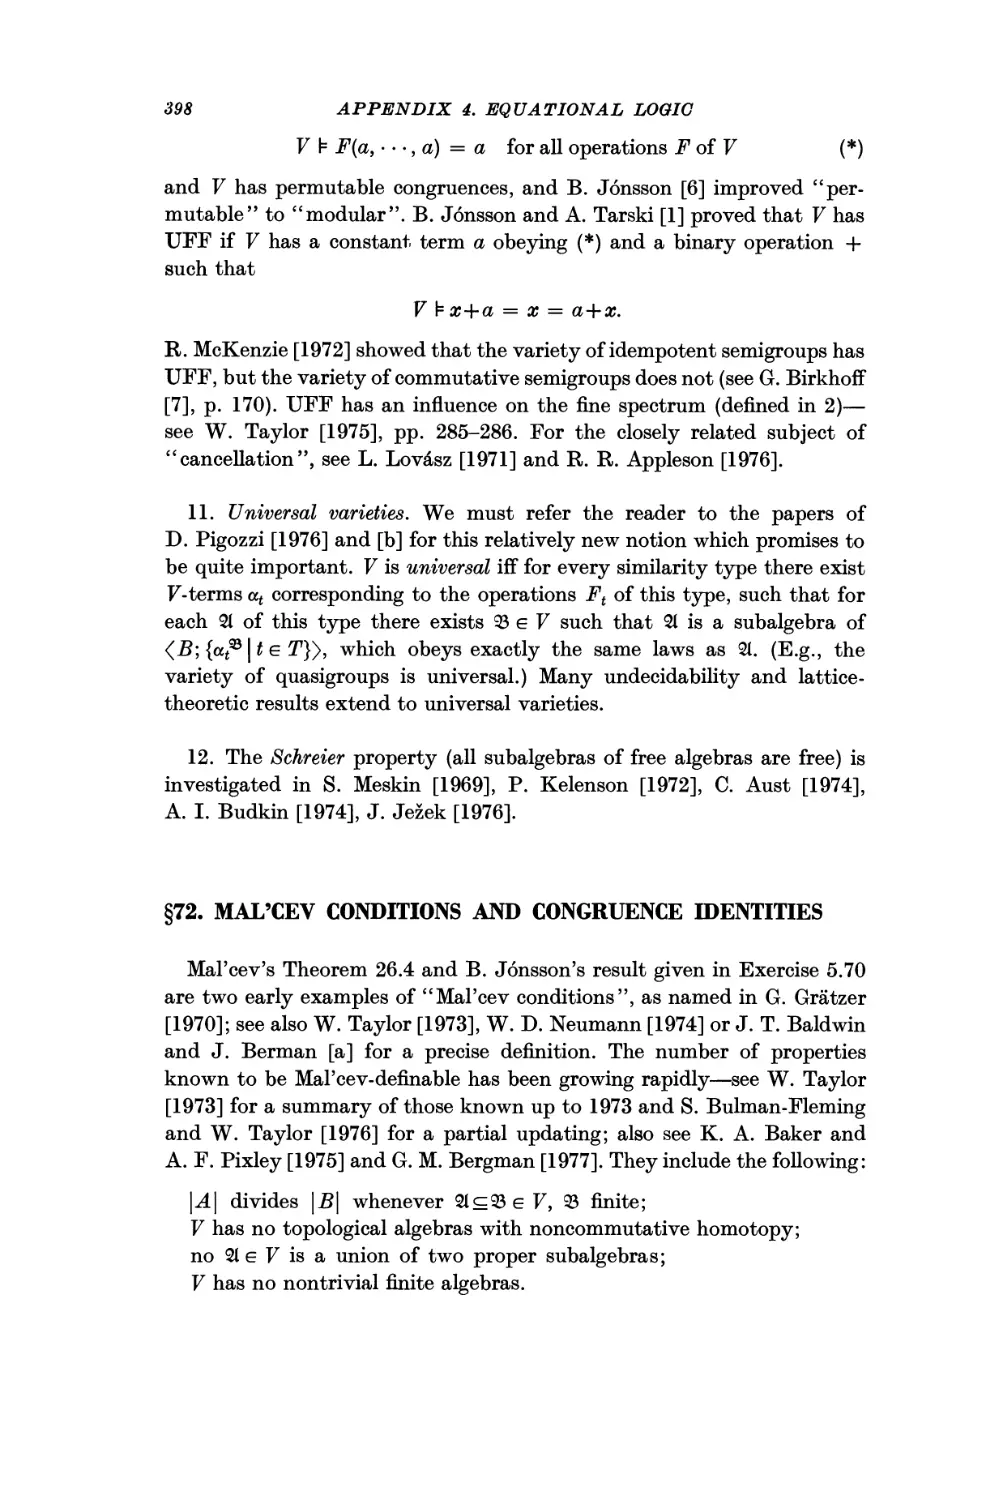 §72. Mal'cev Conditions and Congruence Identities